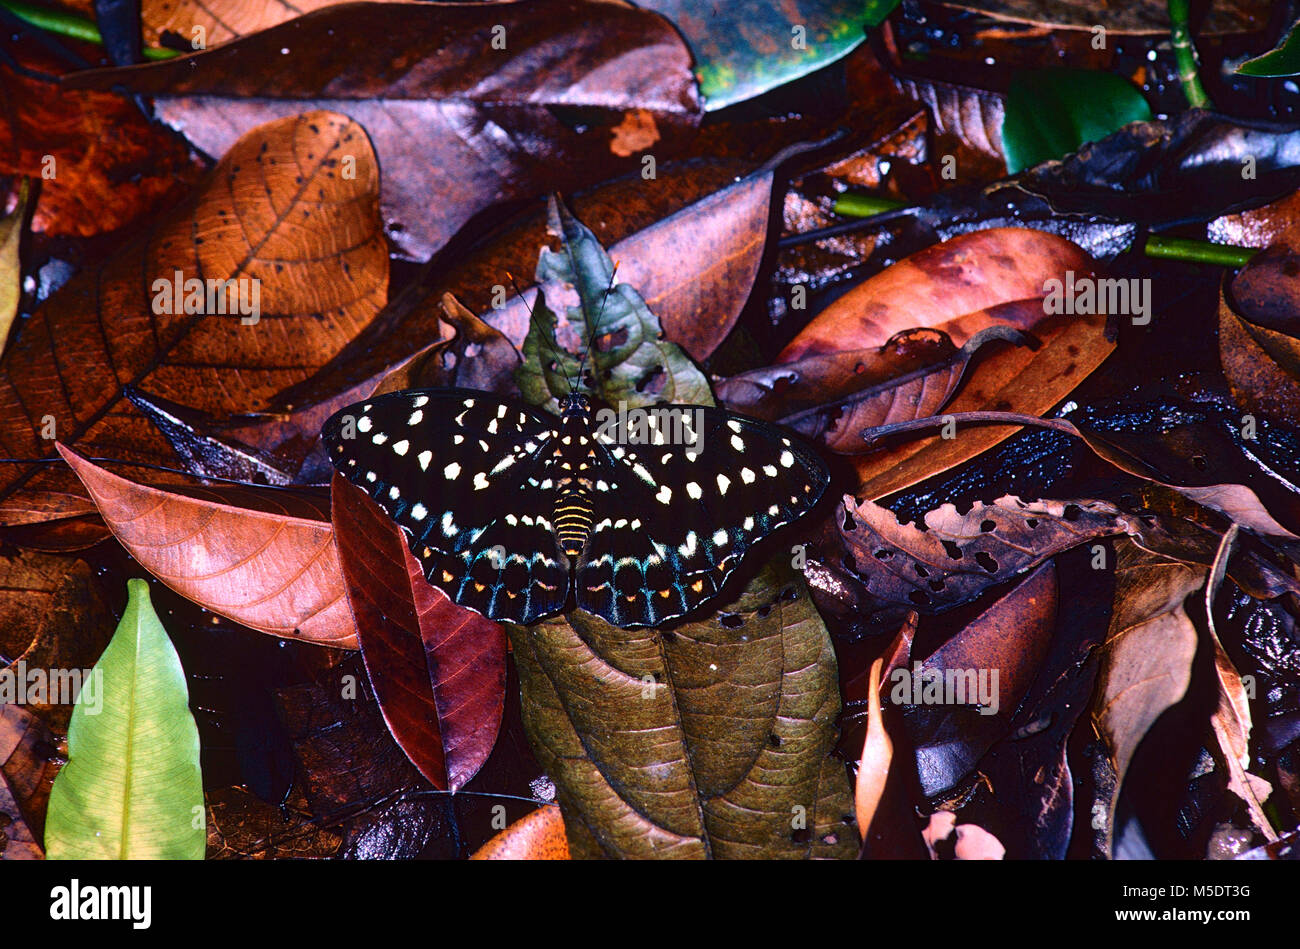 Archduke, Euthalia dirtea, Nymphalide, butterfly, in dead leaves, female, insect, animal, Singapore Stock Photo